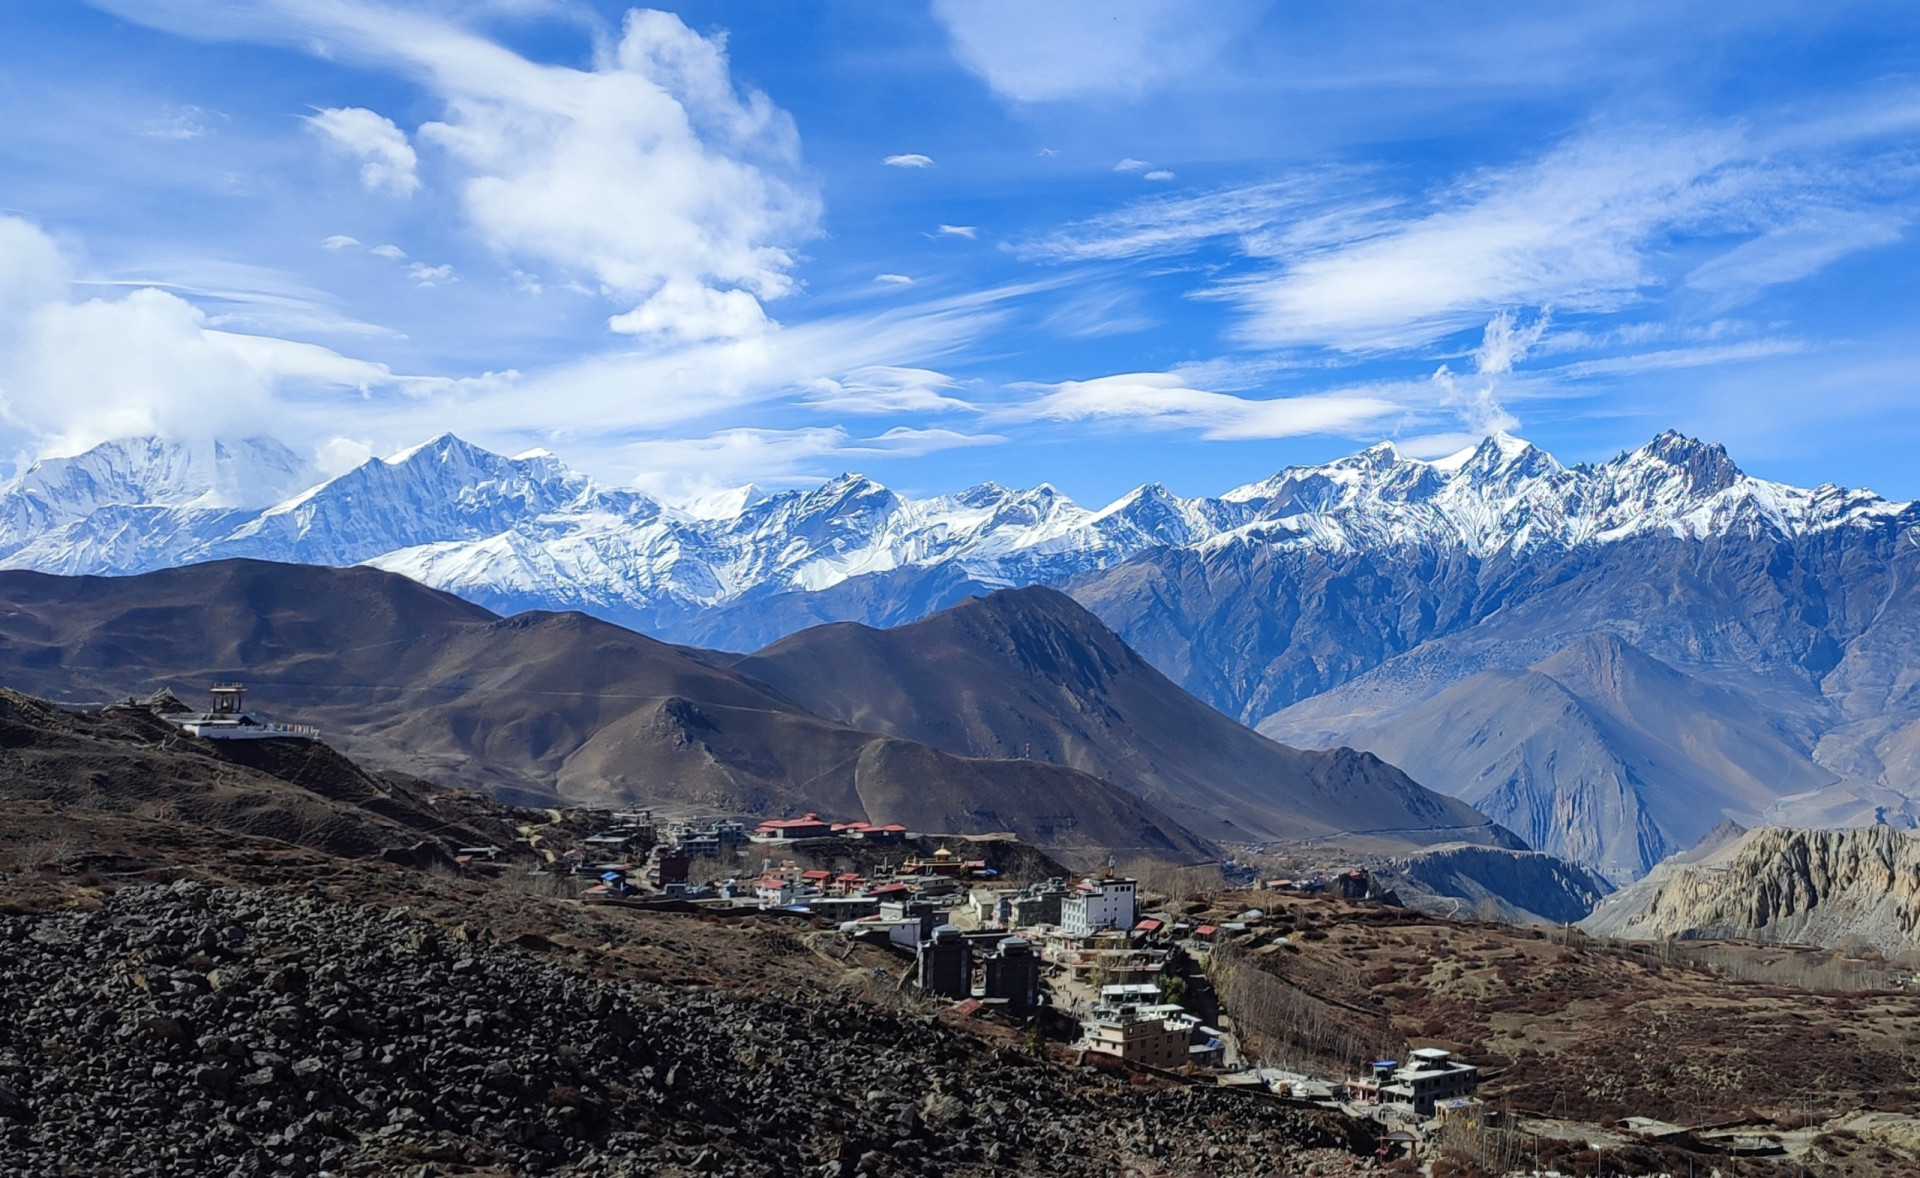 <p>Believe it or not, Nepal's remote Mustang district only opened to outsiders in 1992. Today, a select collection of stunning hotel properties cater to the more discerning traveler, visitors who, while appreciating a touch of luxury, still want to trek the surrounding mountains or discover the countryside on horseback.</p><p>You may also like:<a href="https://www.starsinsider.com/n/388455?utm_source=msn.com&utm_medium=display&utm_campaign=referral_description&utm_content=636762en-en_selected"> 'Beverly Hills 90210': Then and now</a></p>